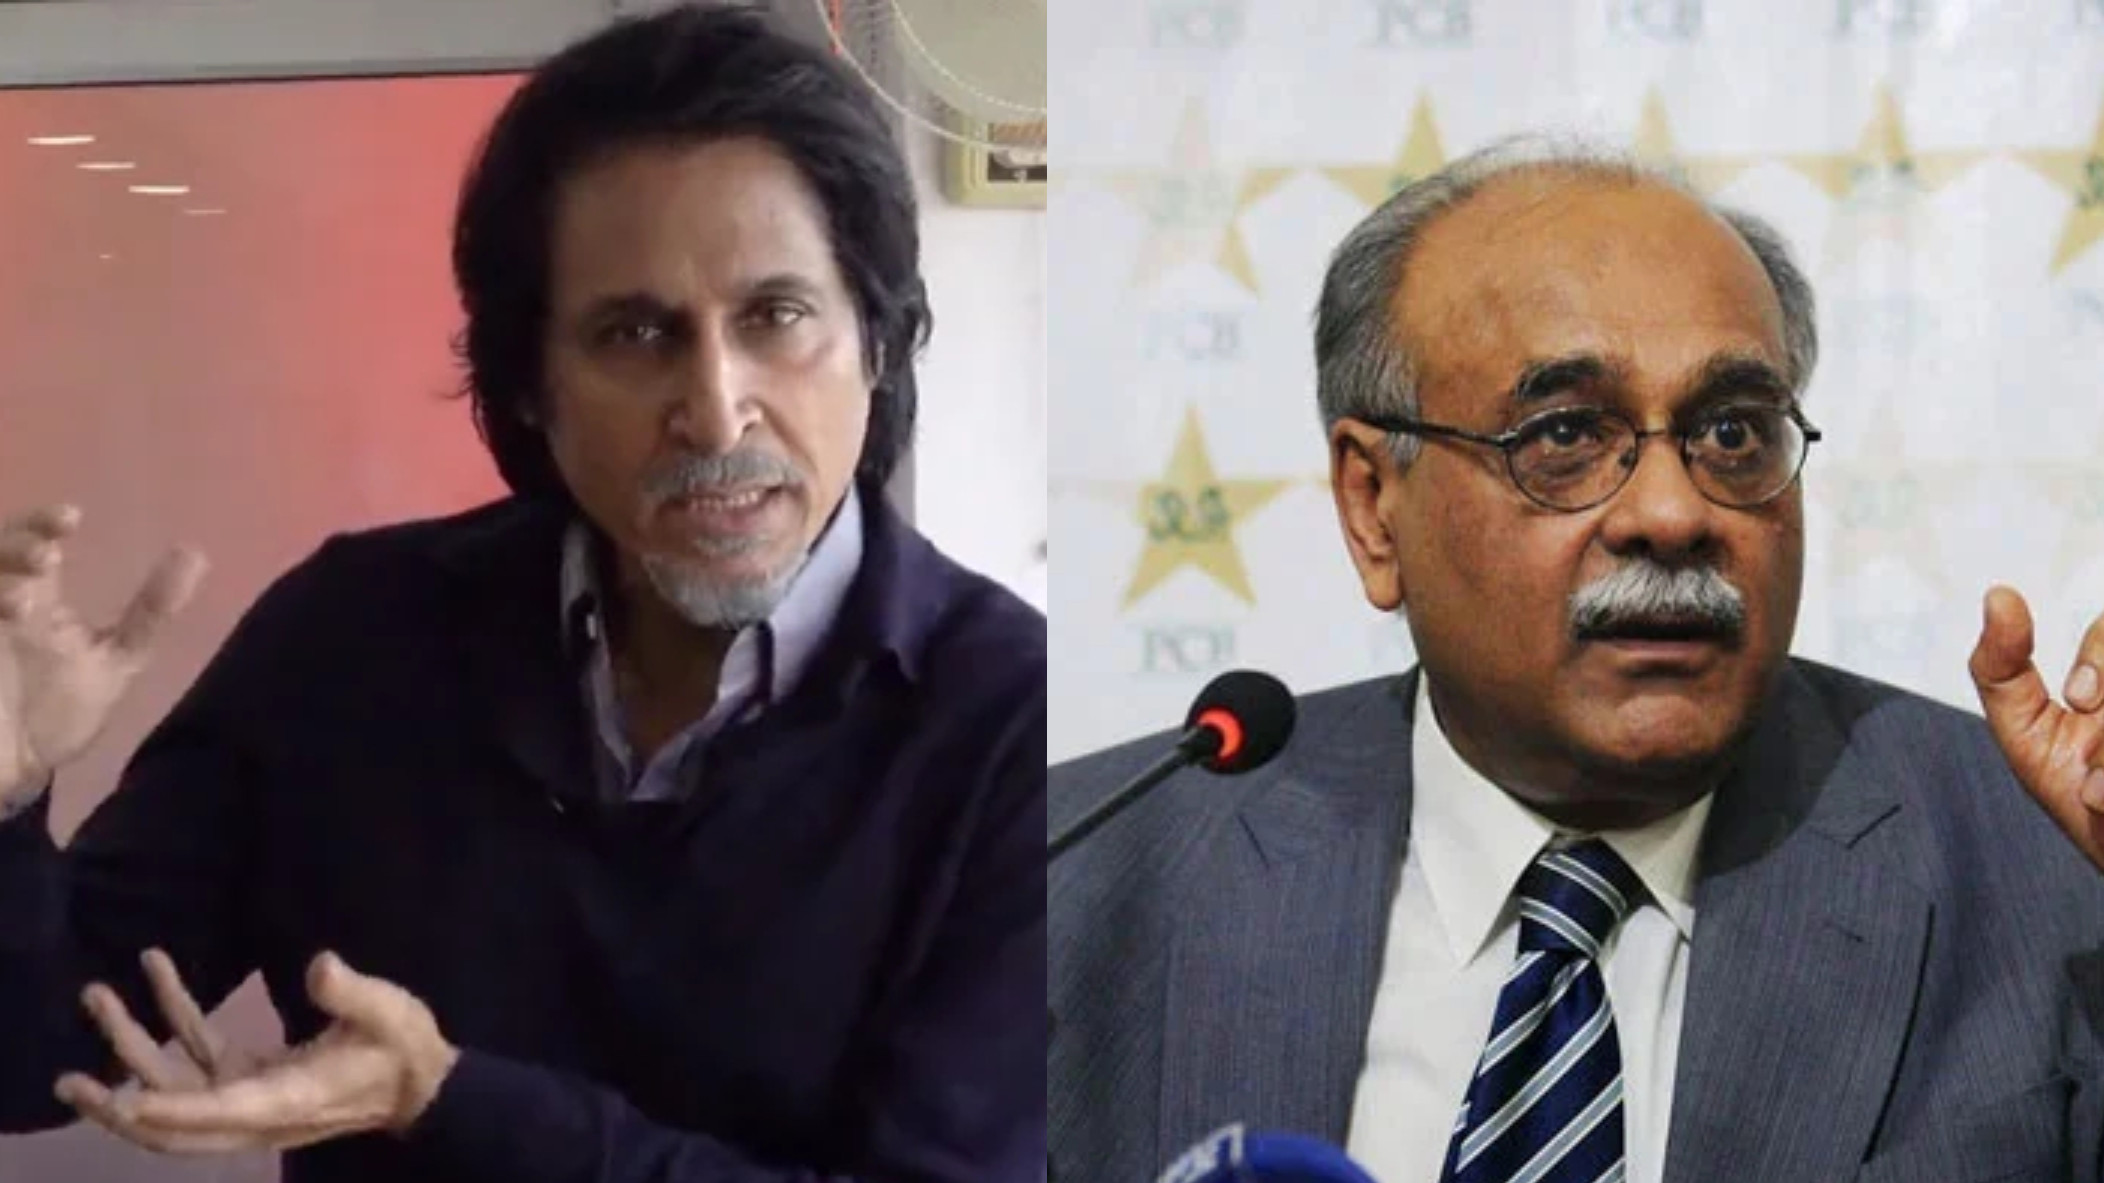 Najam Sethi is not the Messiah he claims to be: Ramiz Raja makes explosive comments after being sacked as PCB chief